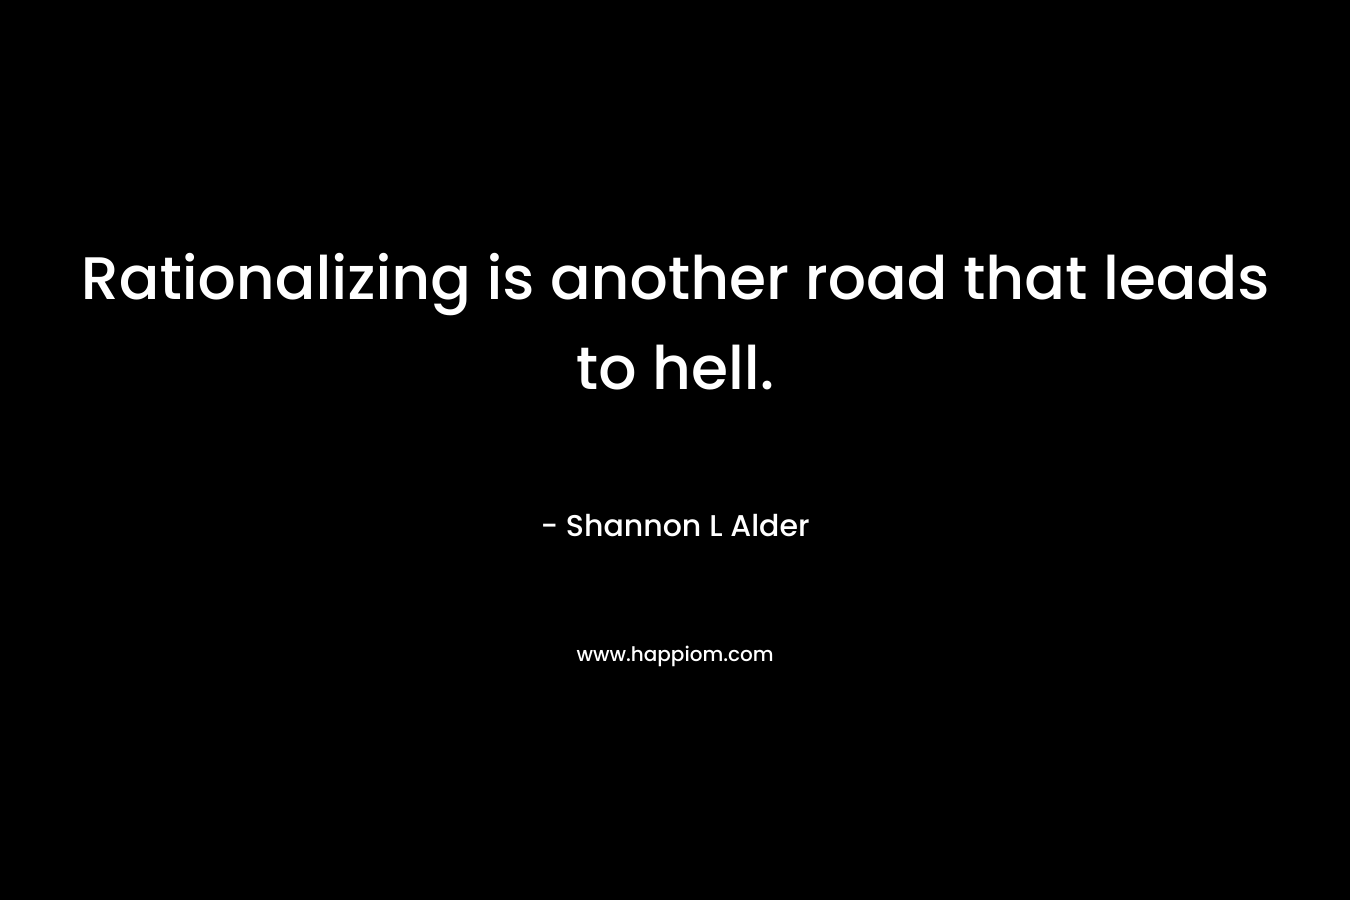 Rationalizing is another road that leads to hell.